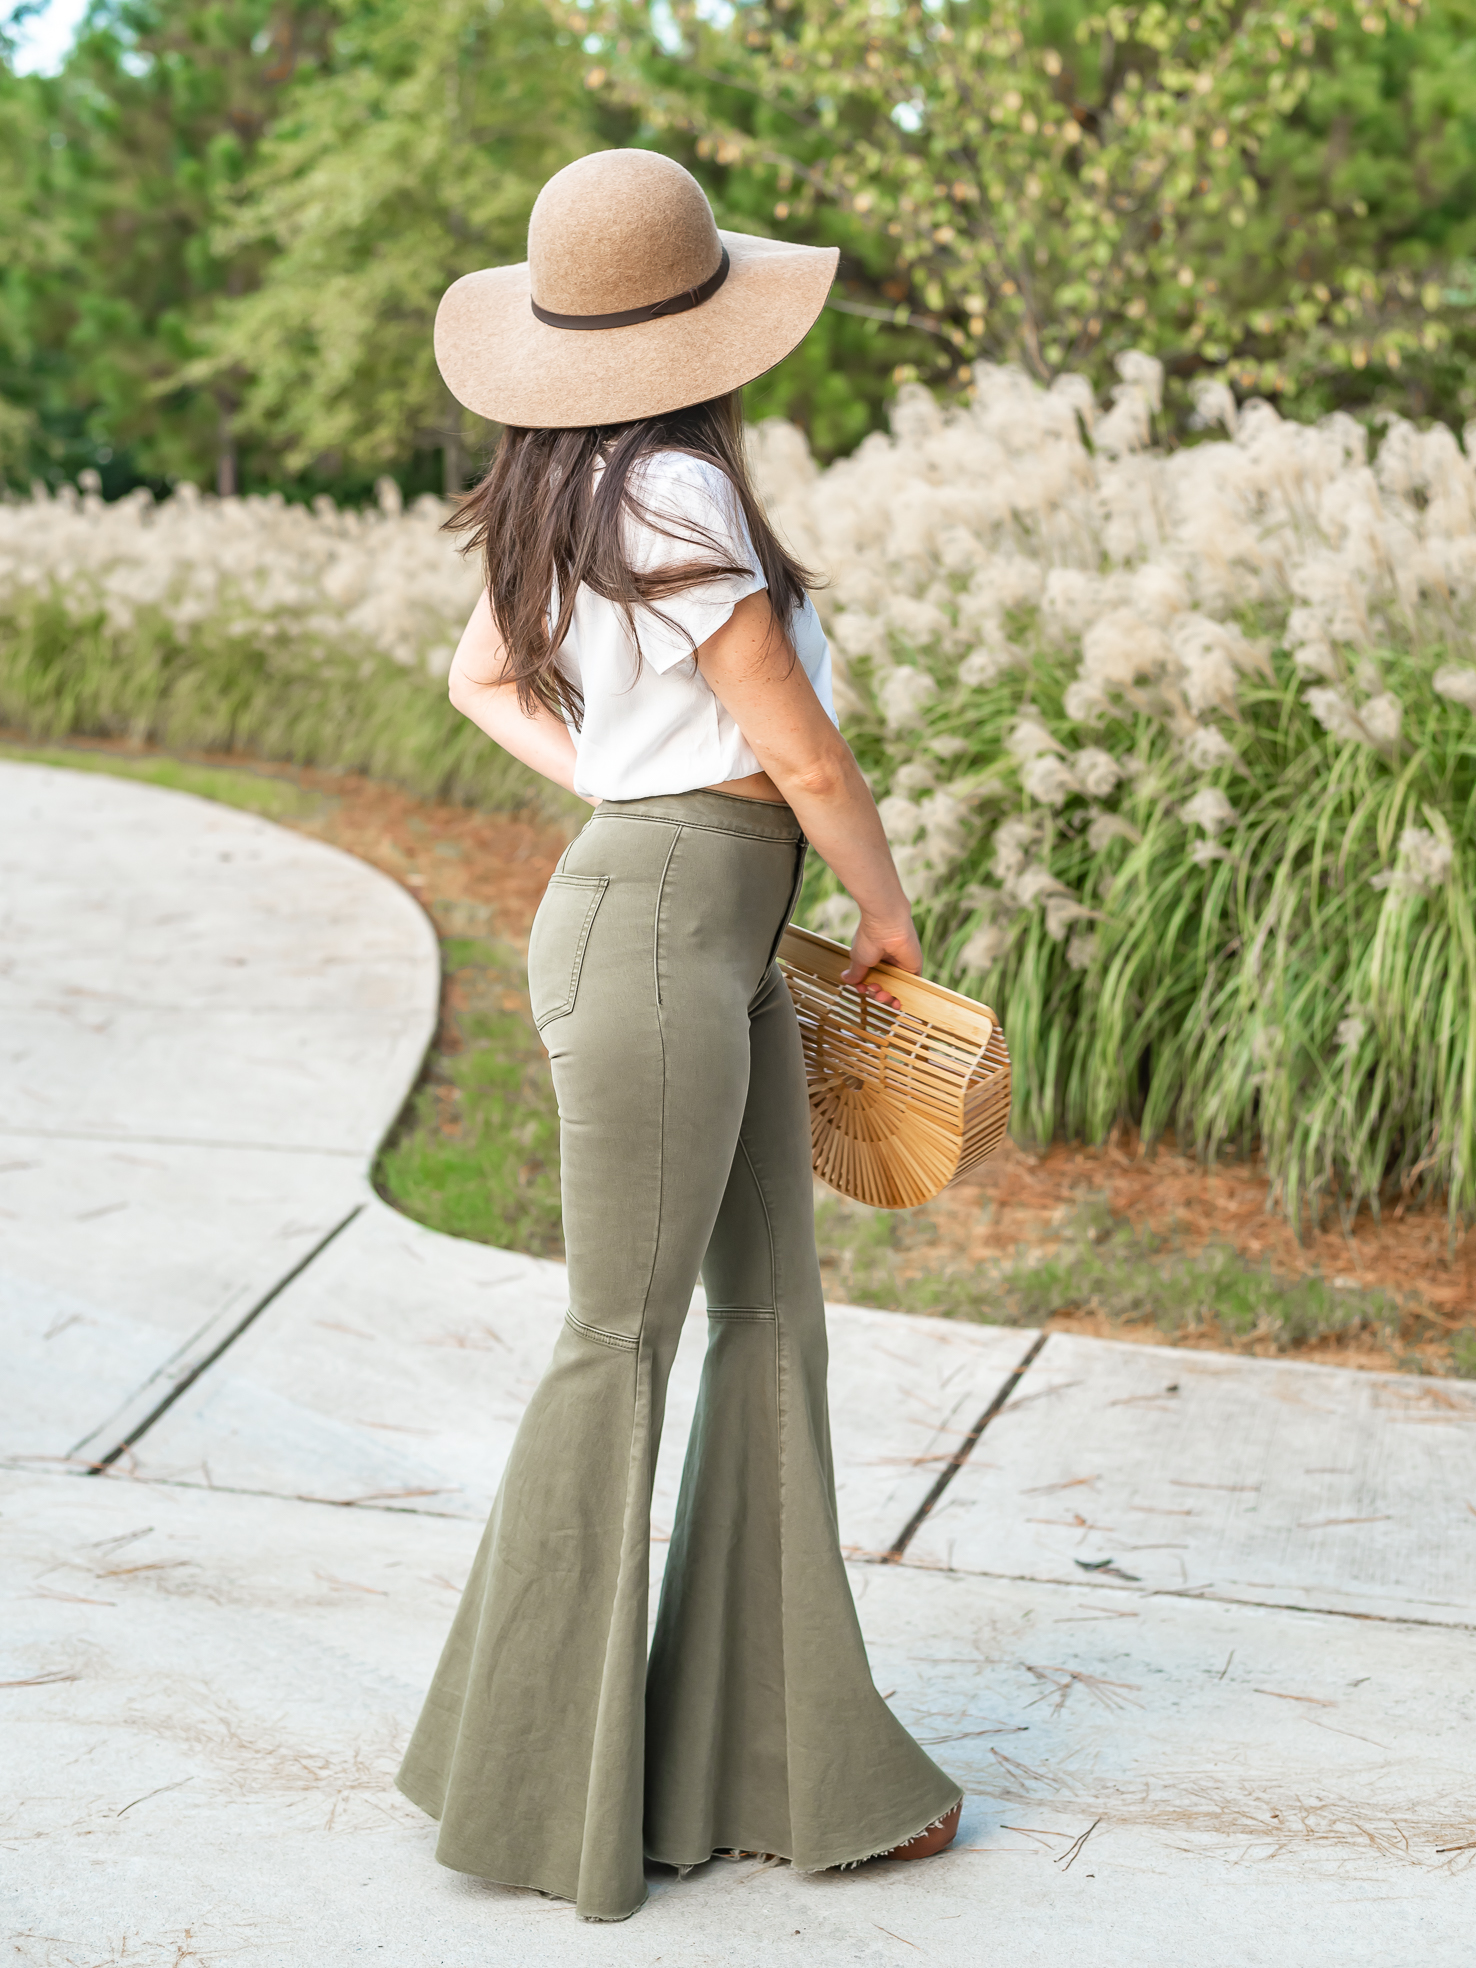 70's Vibes - Bellbottoms & Platform Shoes - Wander in Color - a style,  travel & lifestyle blog by Erica Valentin